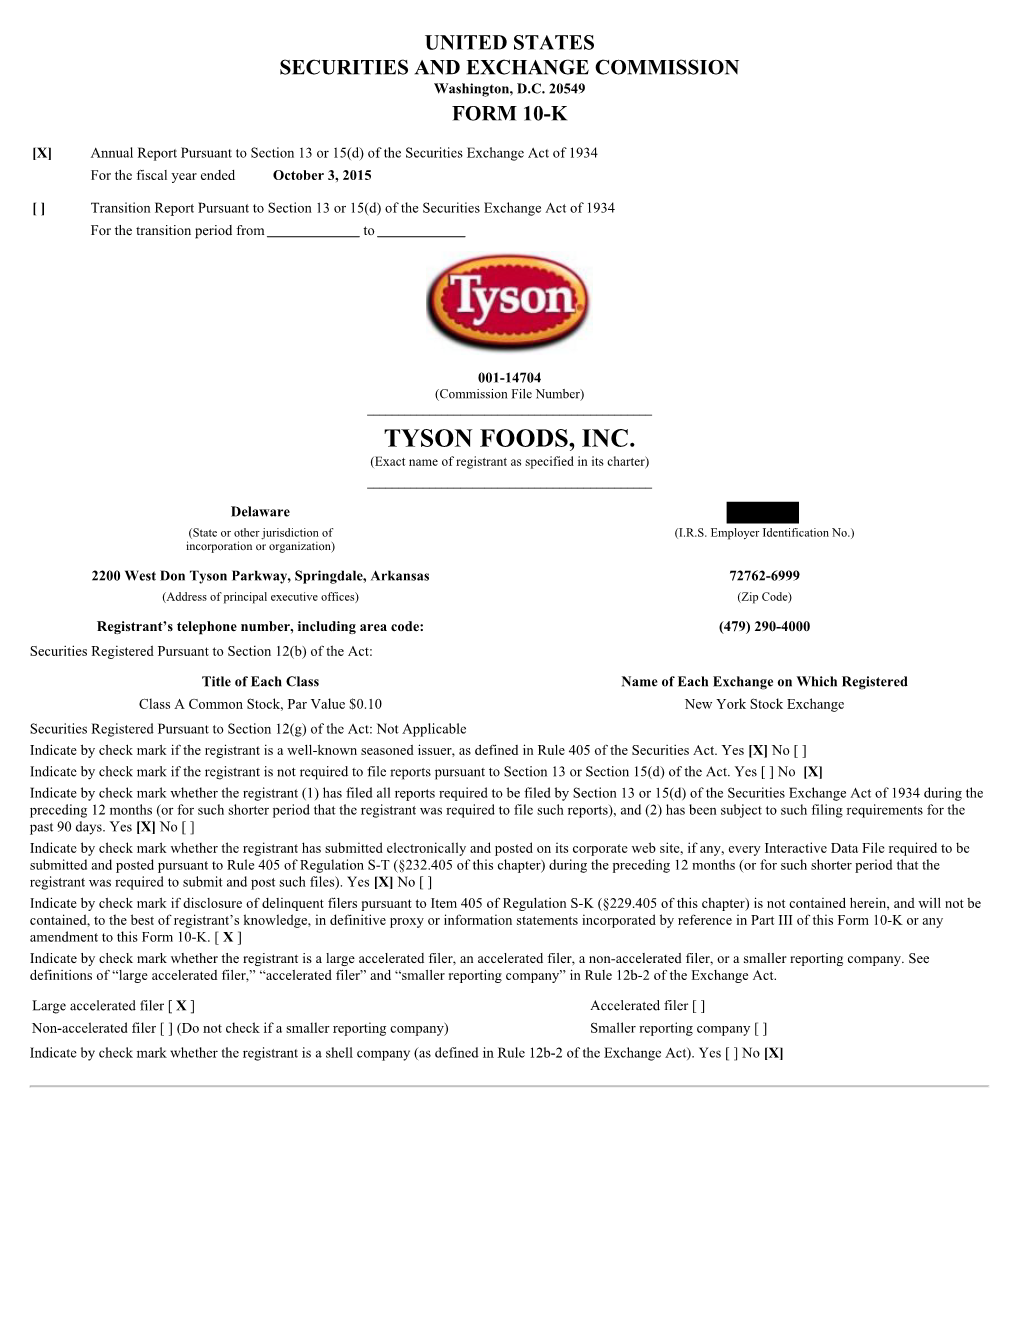 TYSON FOODS, INC. (Exact Name of Registrant As Specified in Its Charter) ______